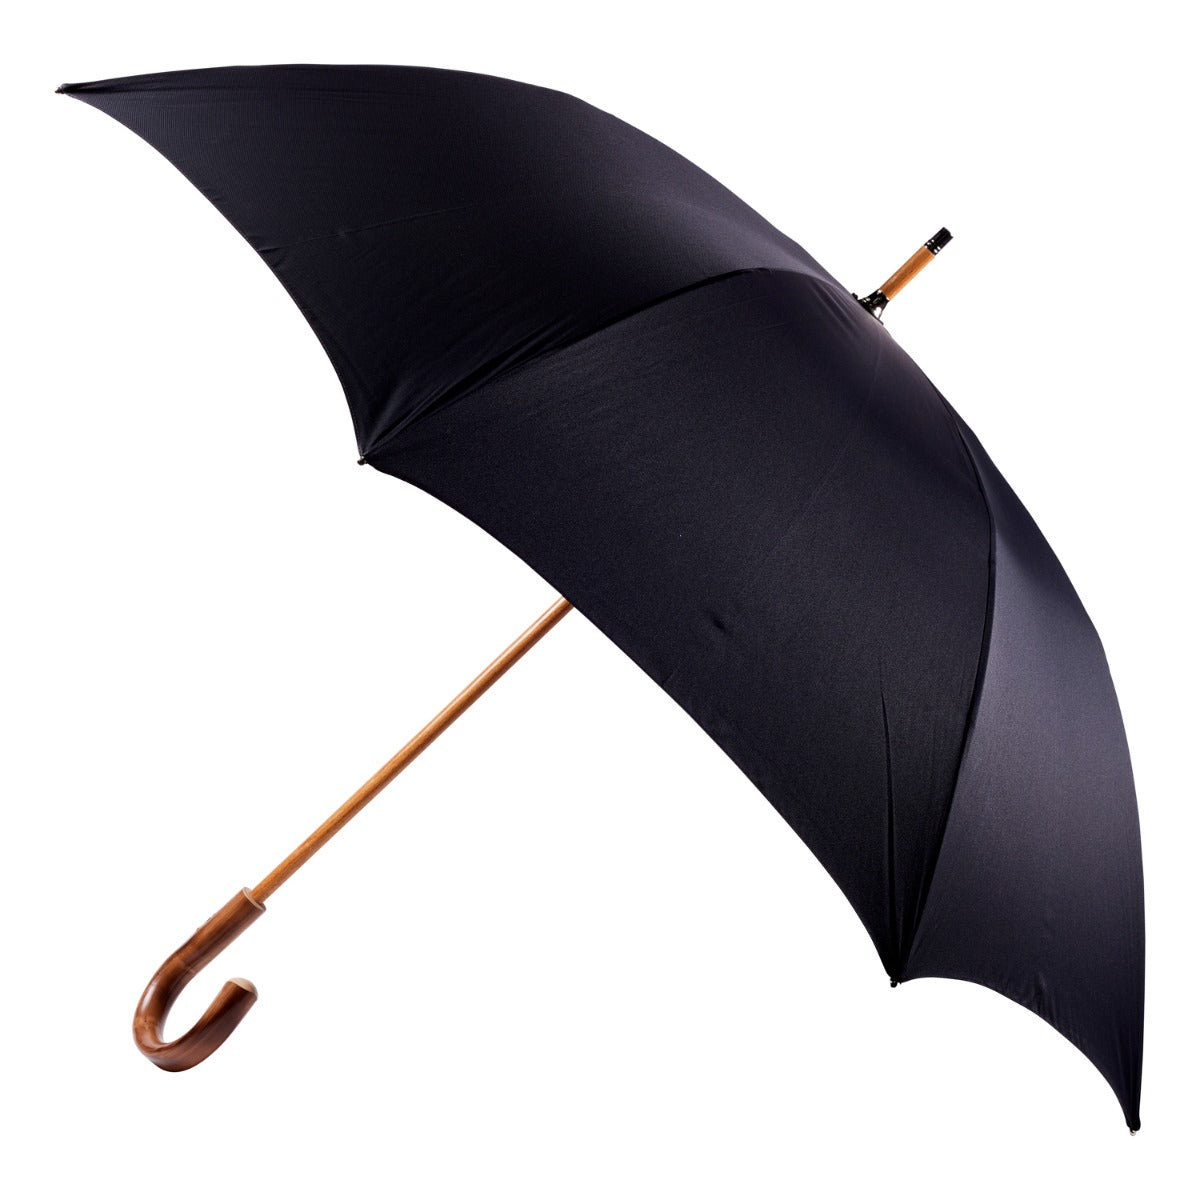 A Chestnut Solid Stick Umbrella with Black Canopy from KirbyAllison.com.